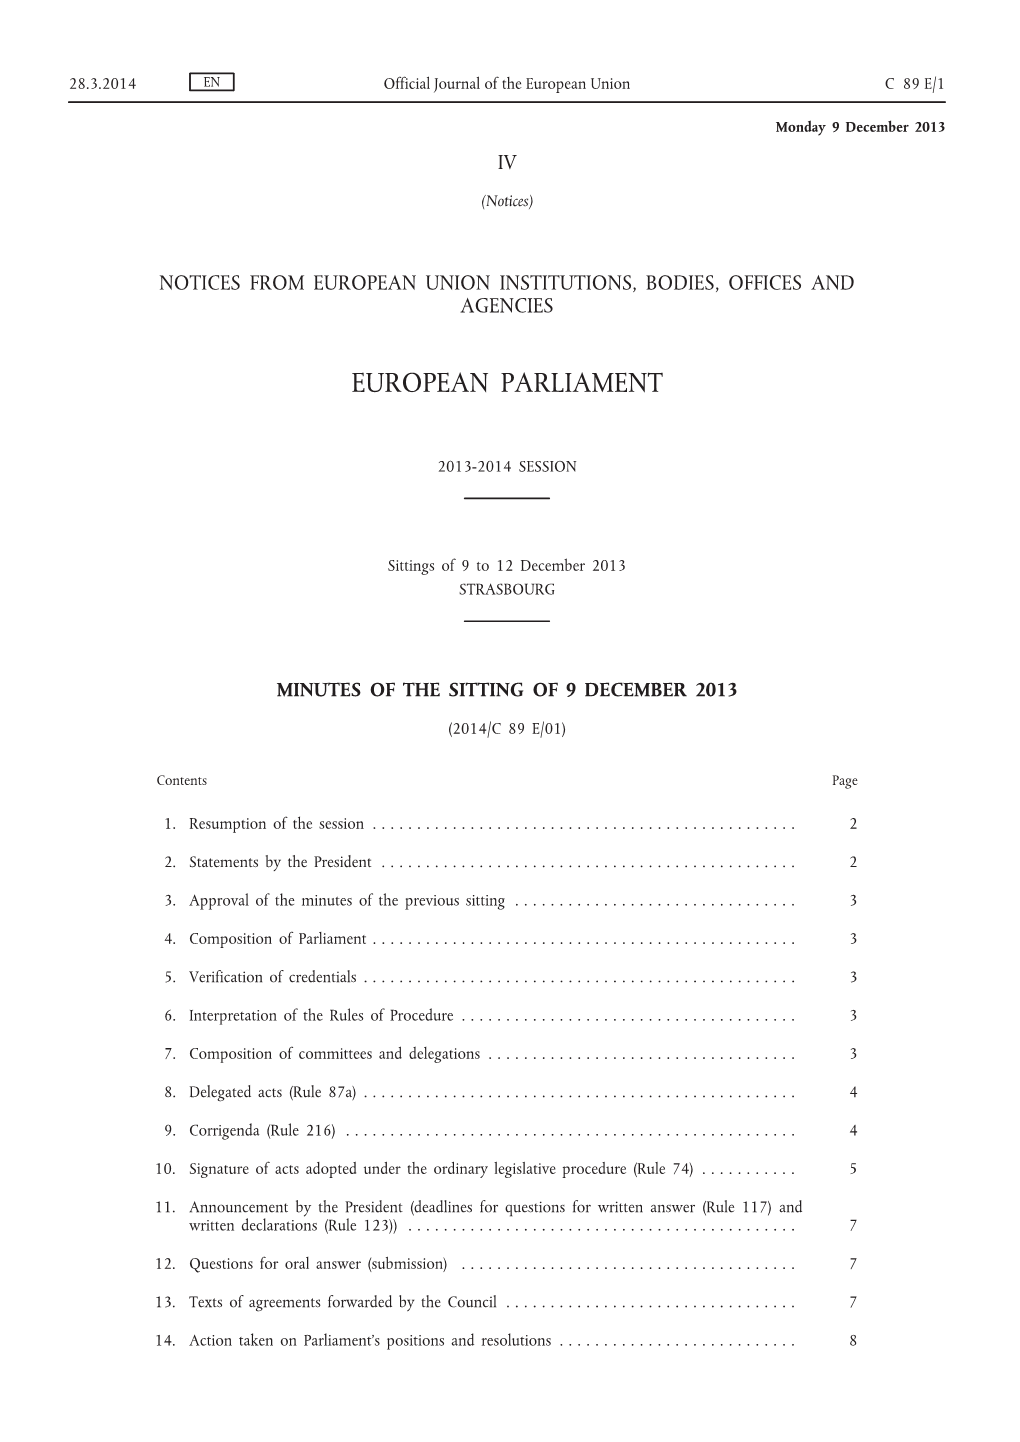 Minutes of the Sitting of 9 December 2013